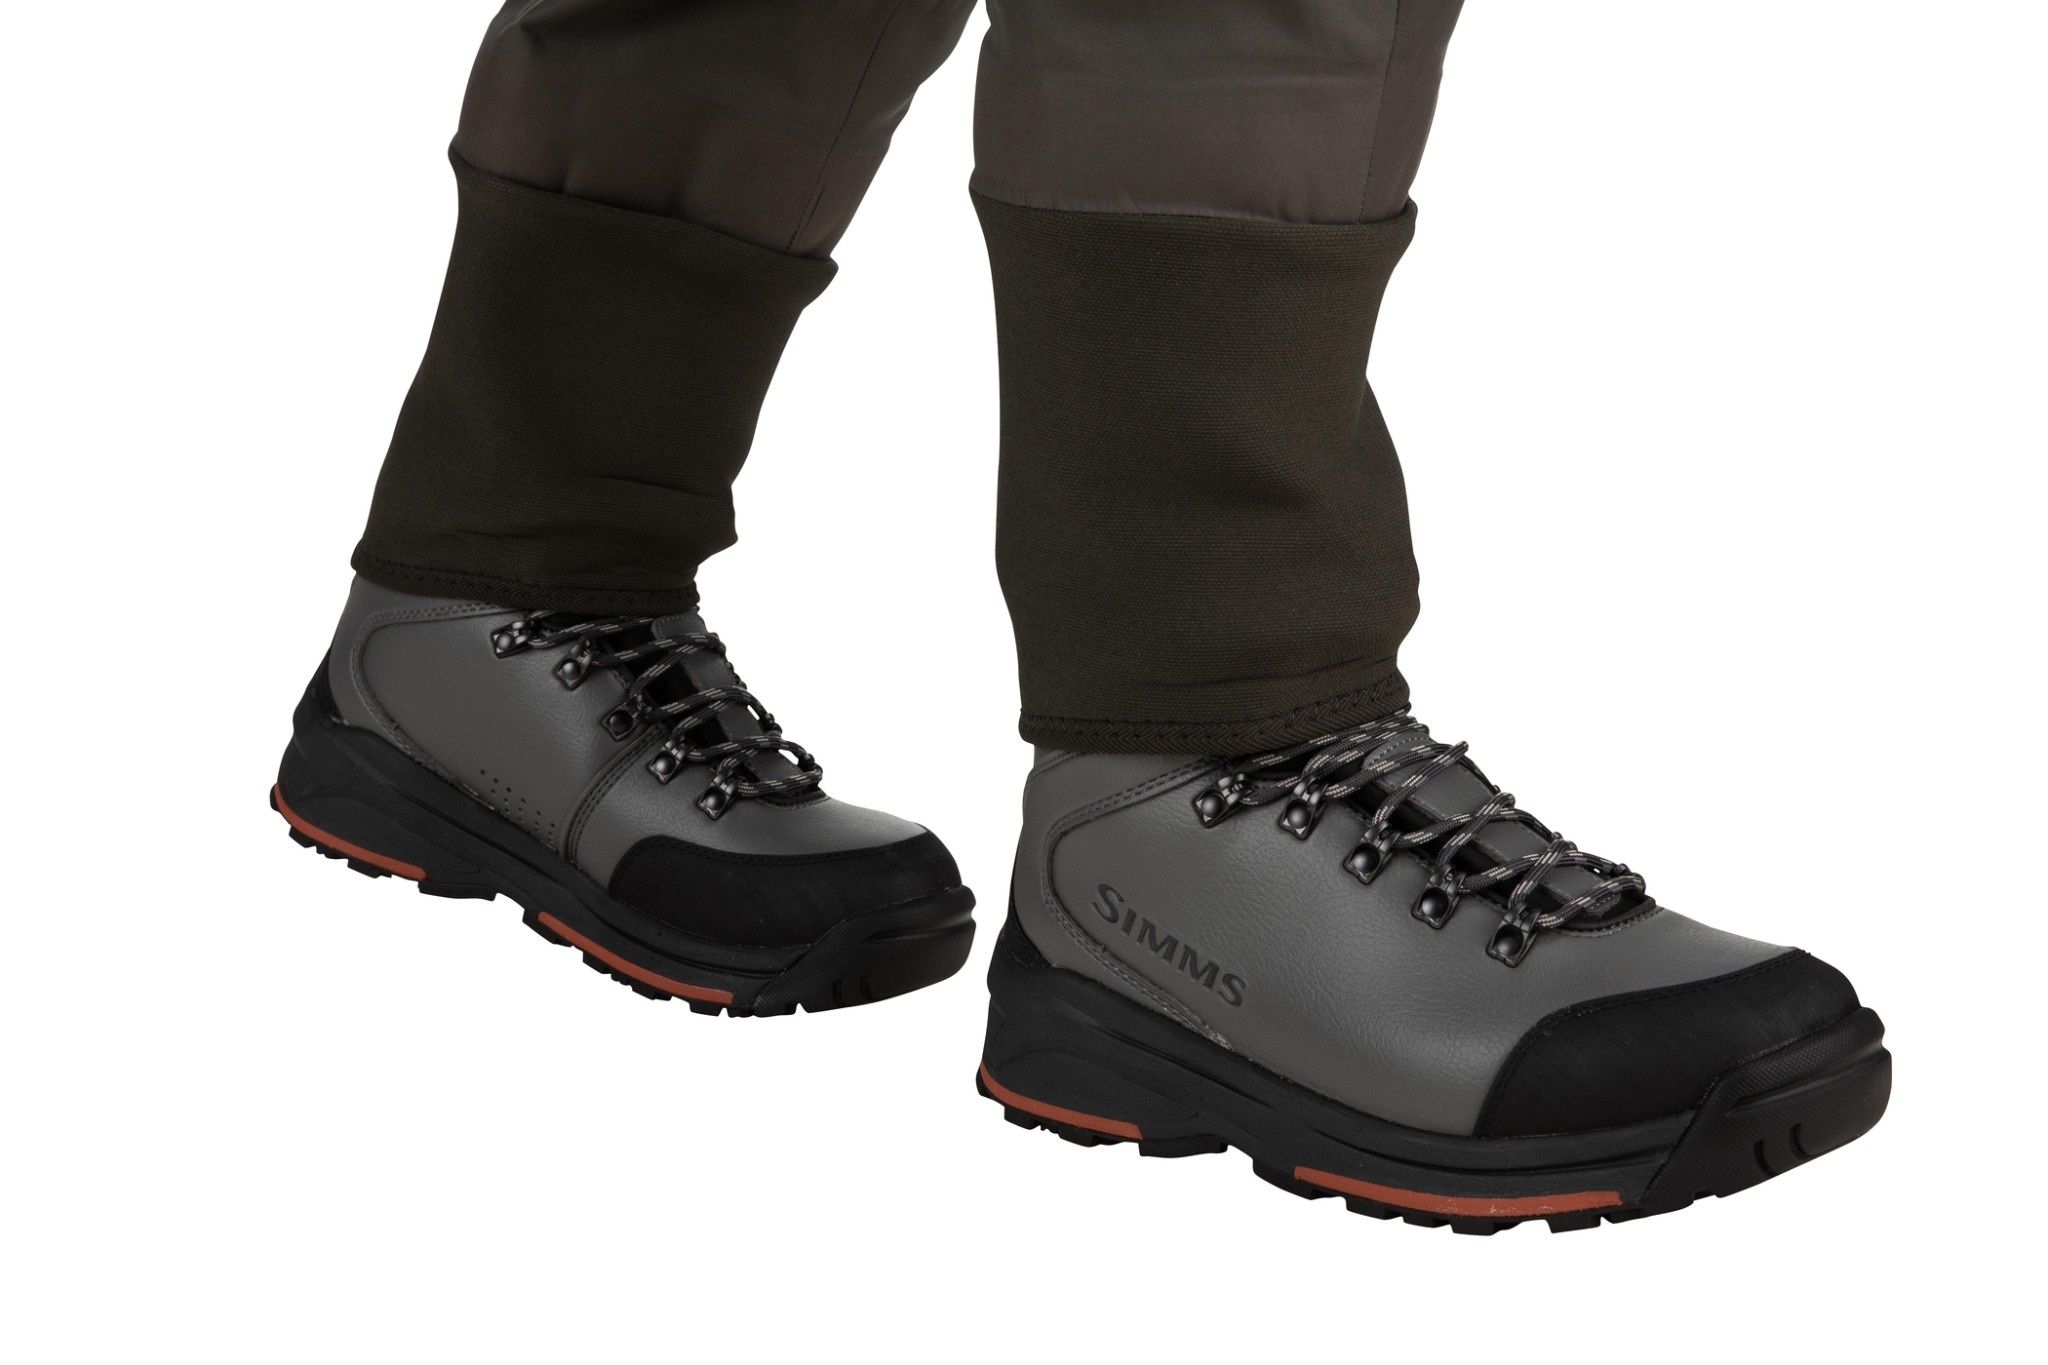 Simms Simms W's G3 Guide Stockingfoot Waders